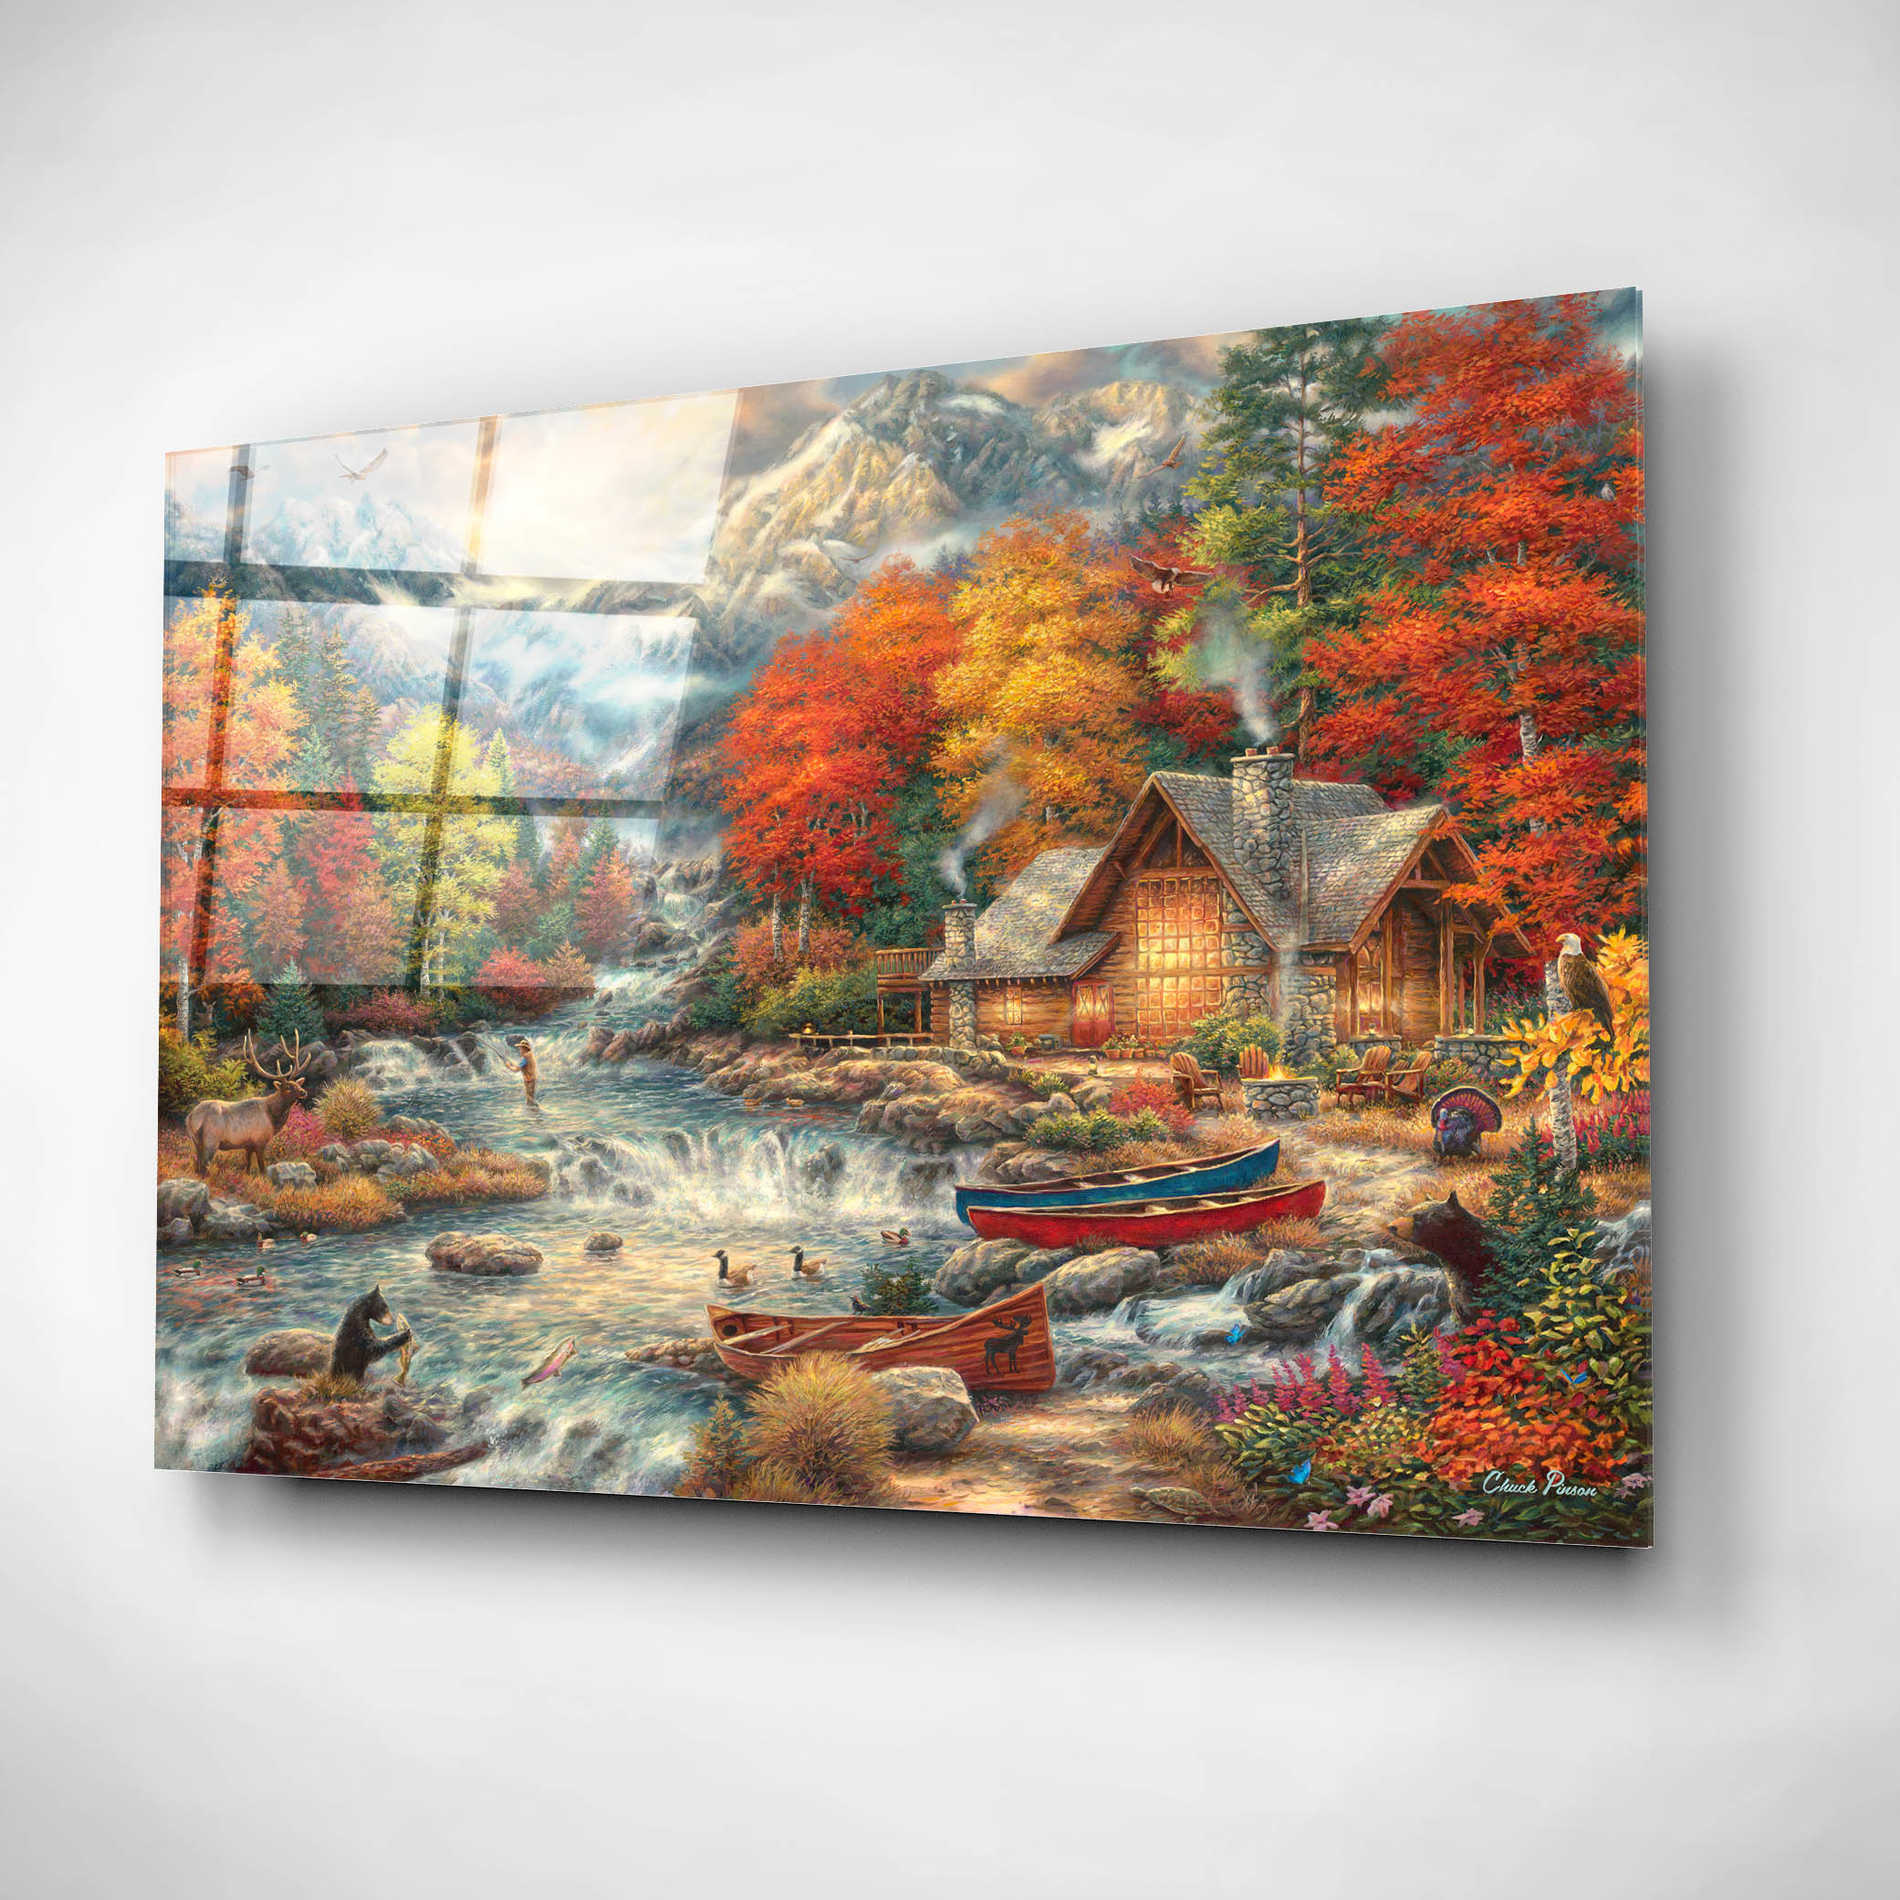 Epic Art 'Treasures of the Great Outdoors' by Chuck Pinson, Acrylic Glass Wall Art,24x16